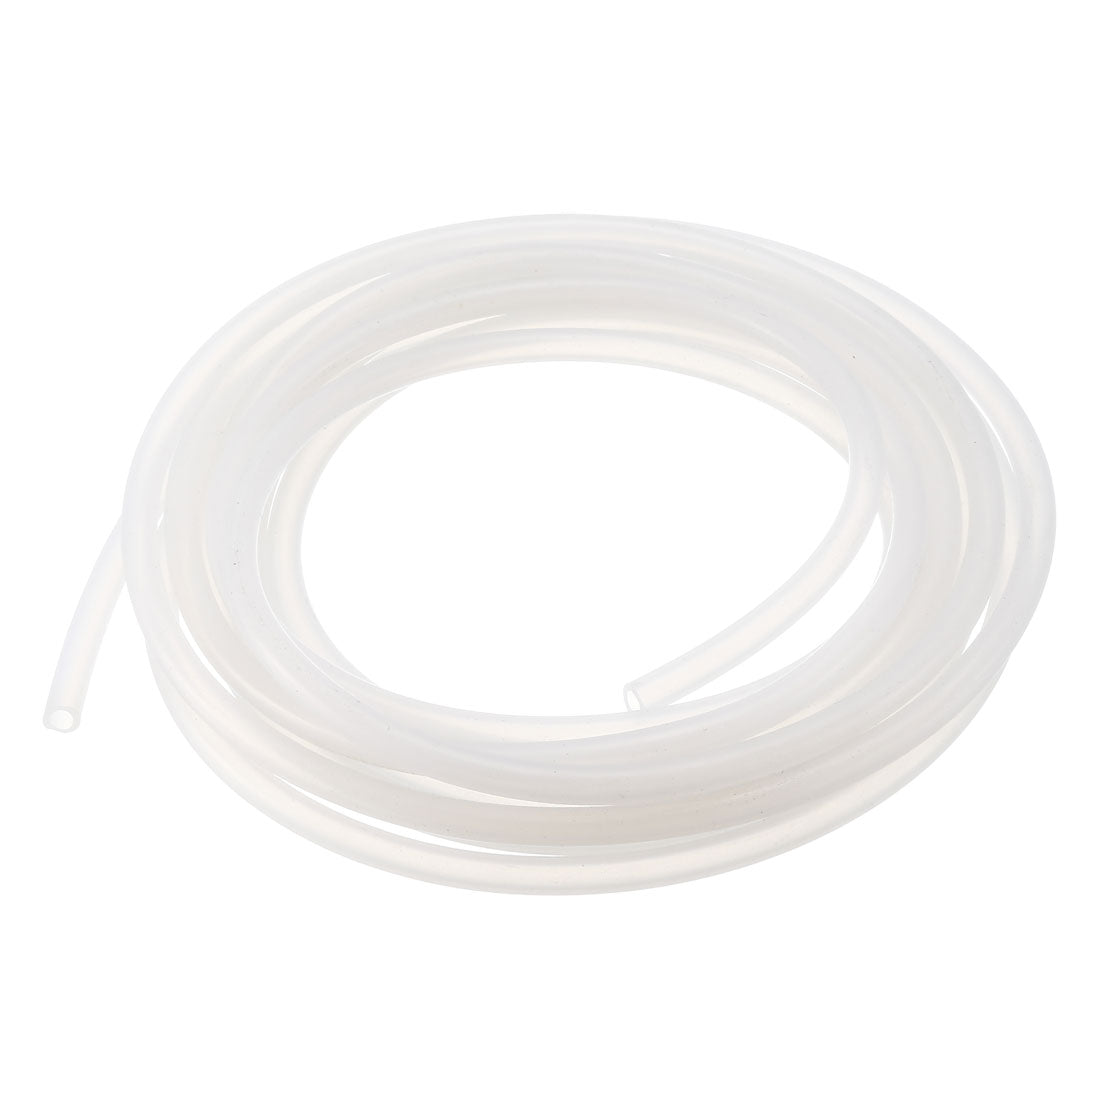 uxcell Uxcell Silicone Tube 3mm ID 5mm OD Hose Rubber Flexible Translucent Tubing Pipe 3 Meters for Pump Transfer